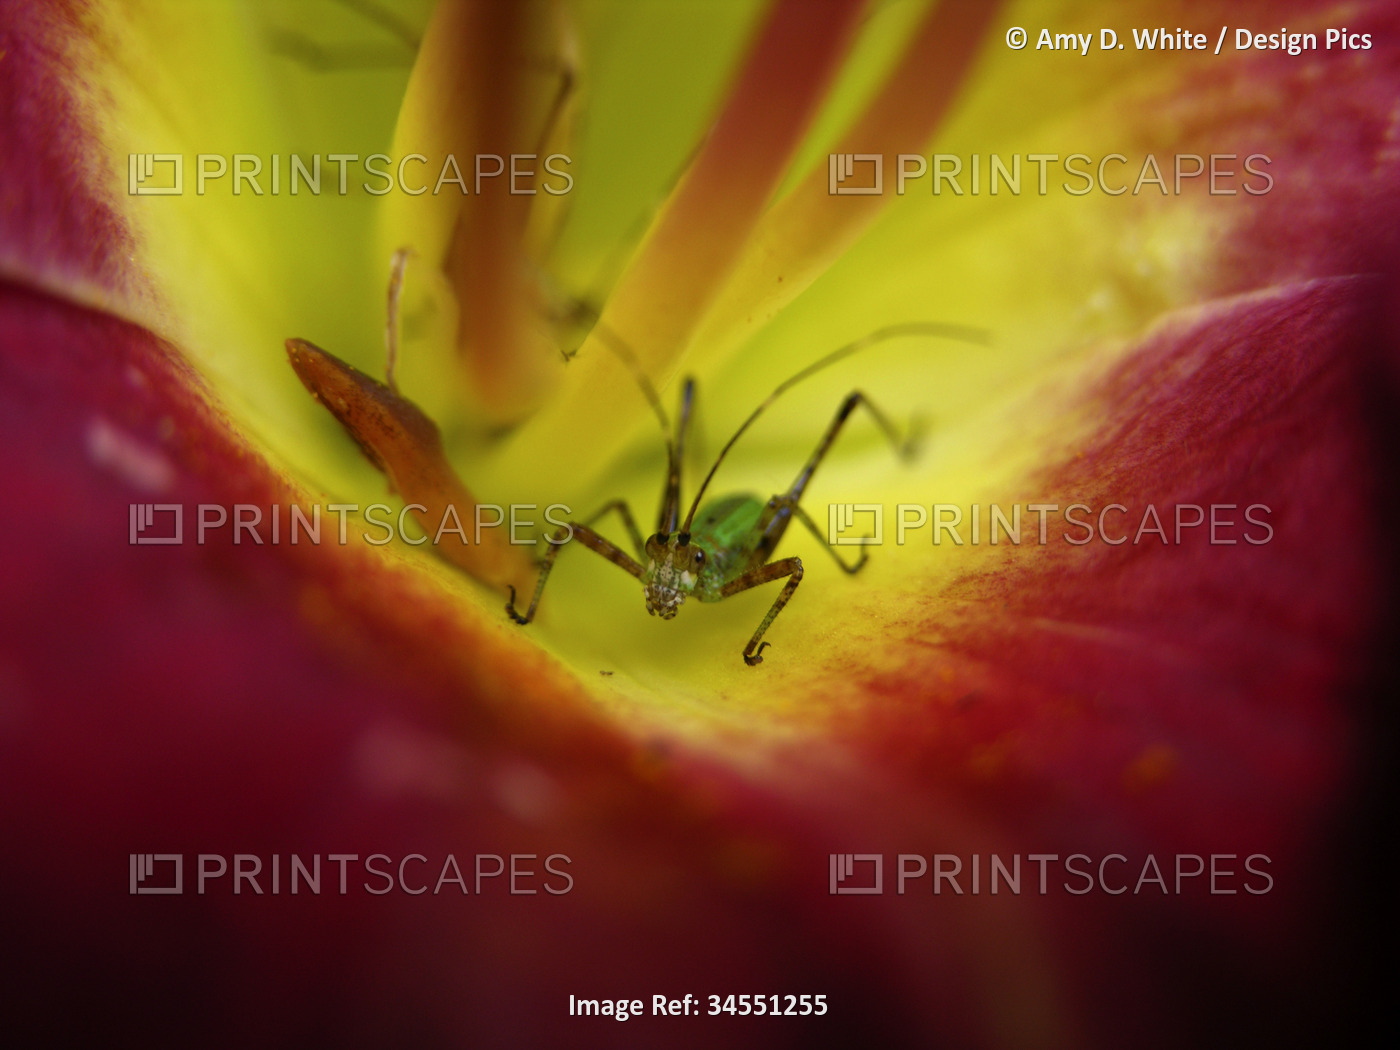 Cricket inside a day lily flower; North Carolina, United States of America